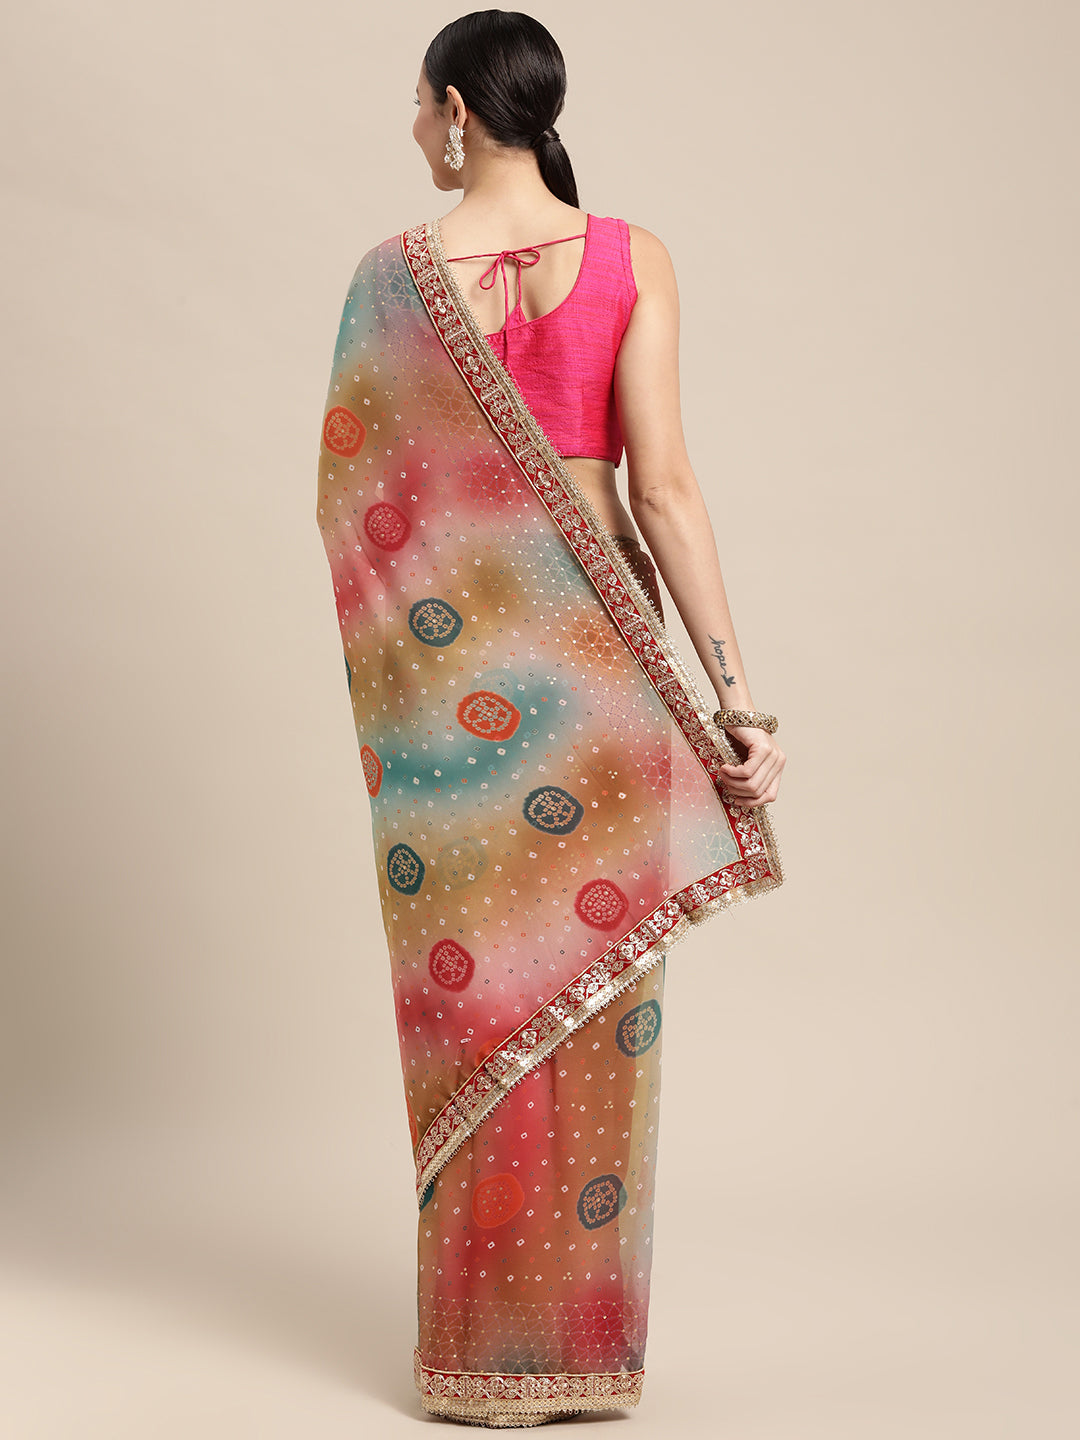 Georgette Bandhani Saree With Foil Print And Lace Border